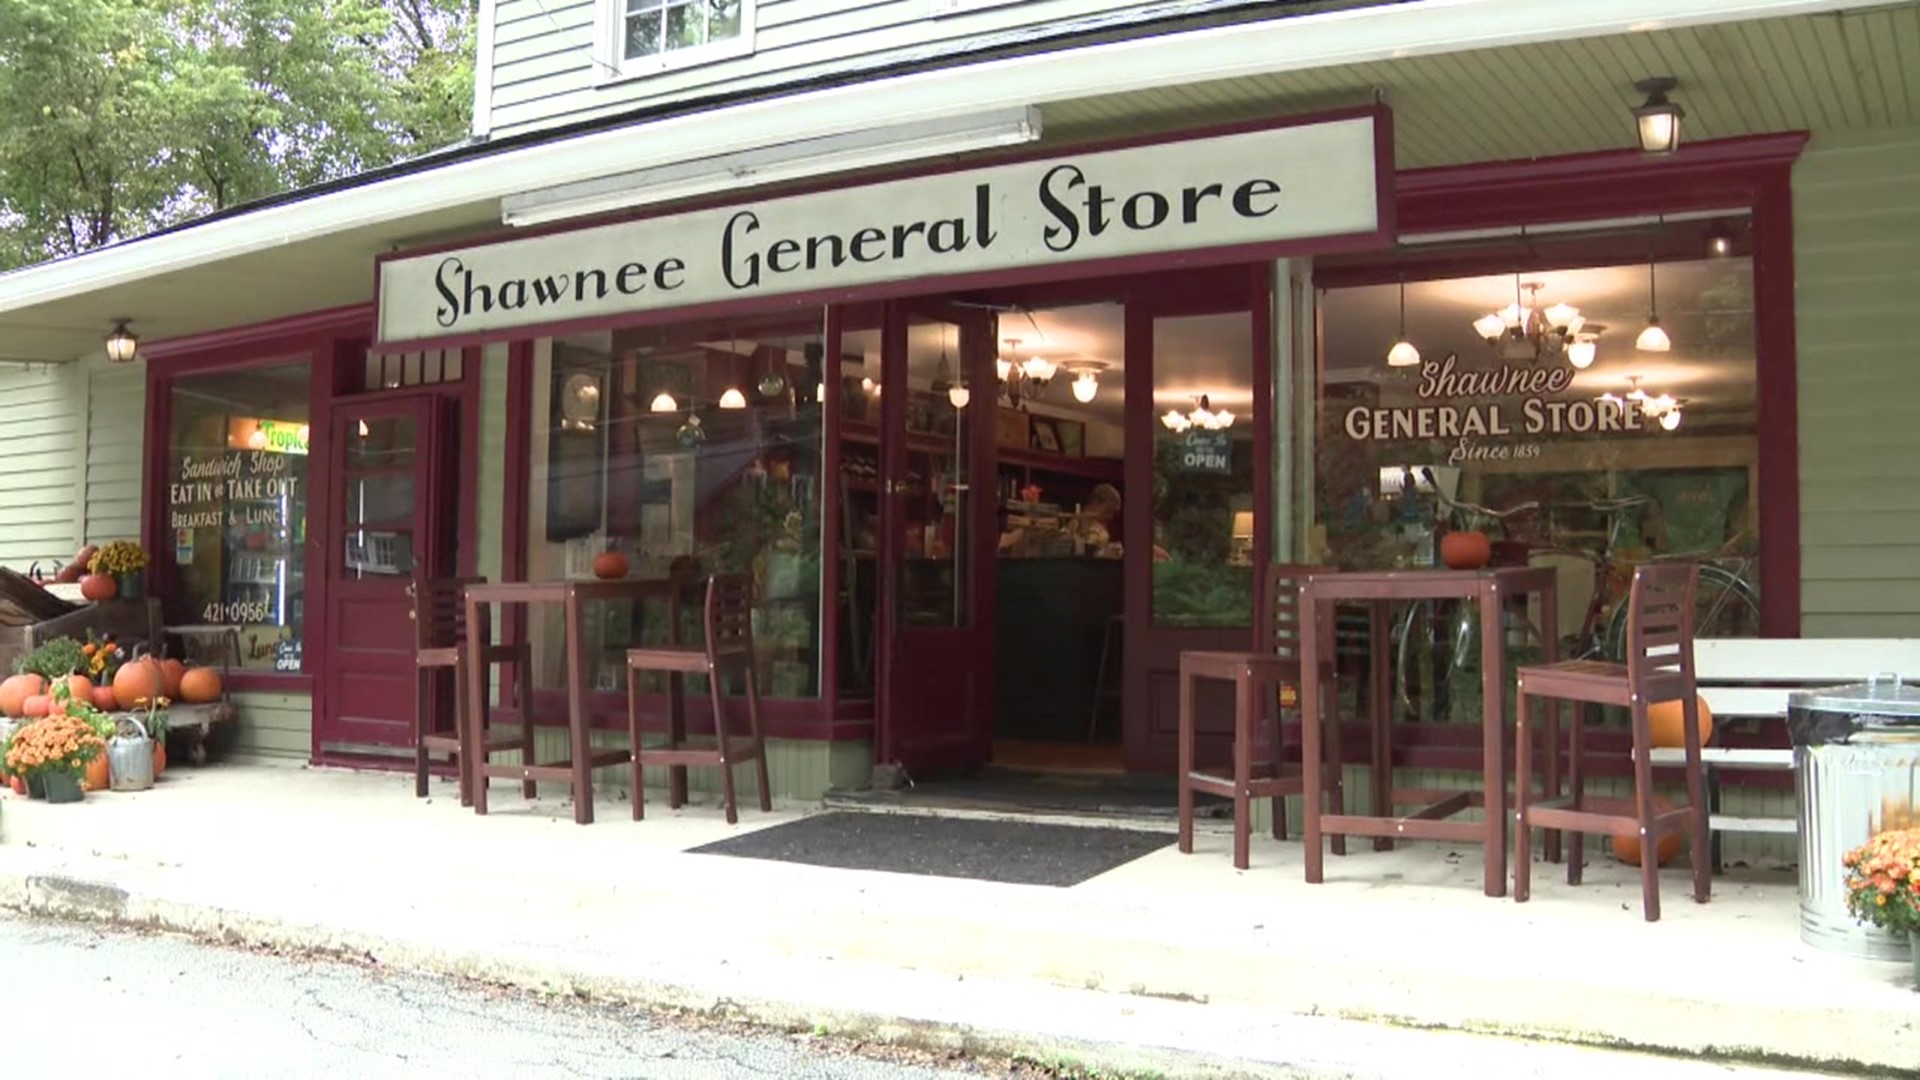 The Shawnee General Store in Smithfield Township is planning to host a reopening celebration this weekend after being closed because of the pandemic.